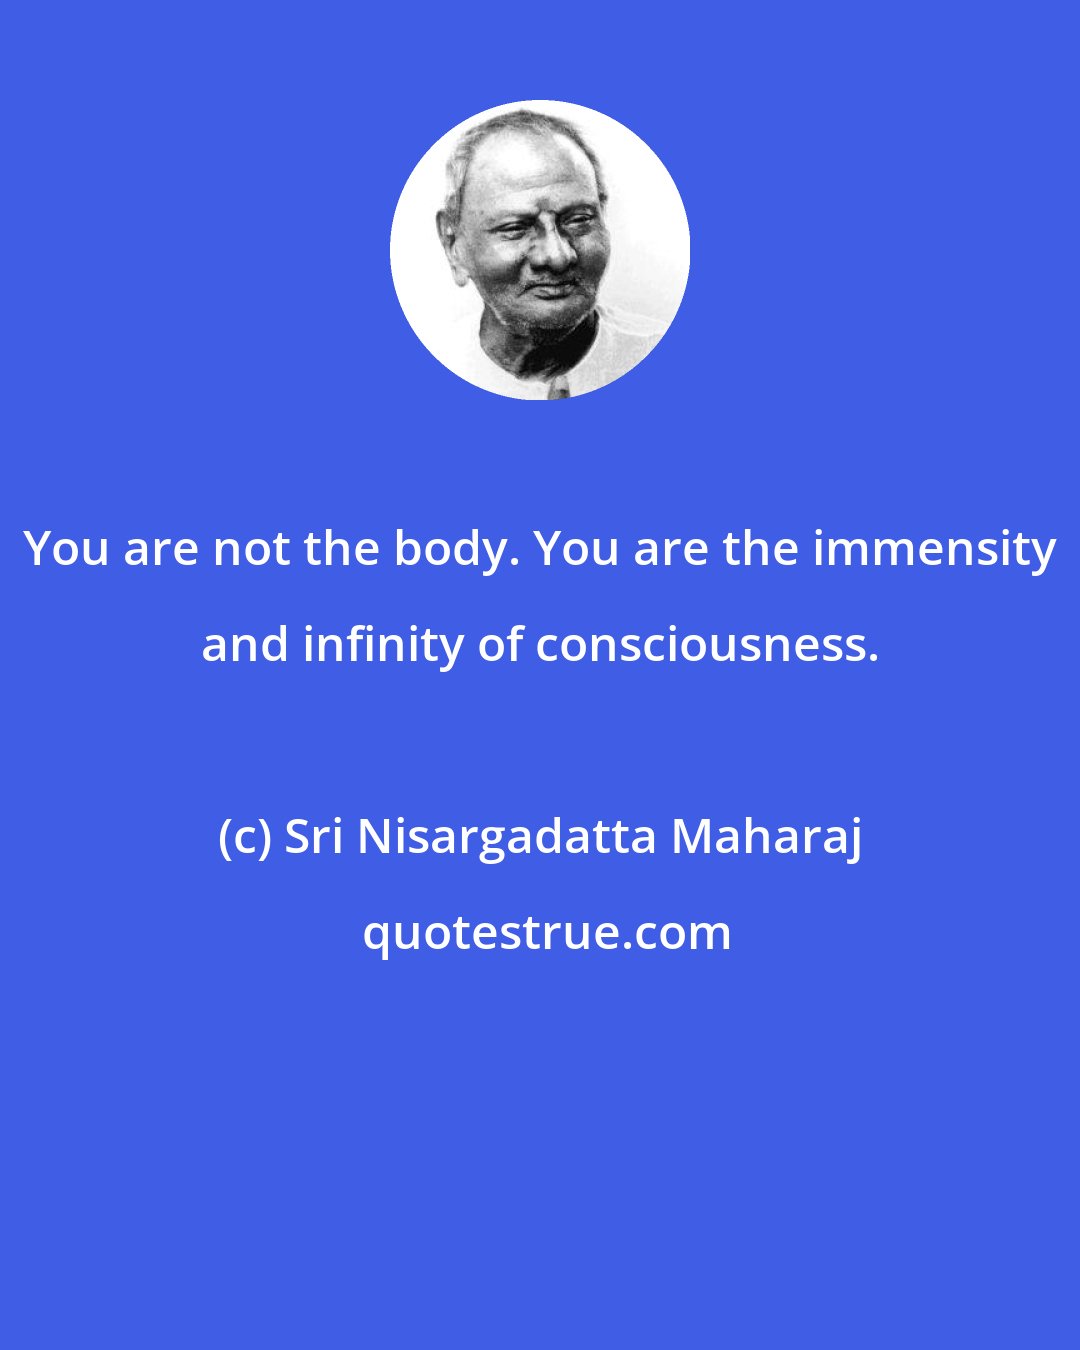 Sri Nisargadatta Maharaj: You are not the body. You are the immensity and infinity of consciousness.